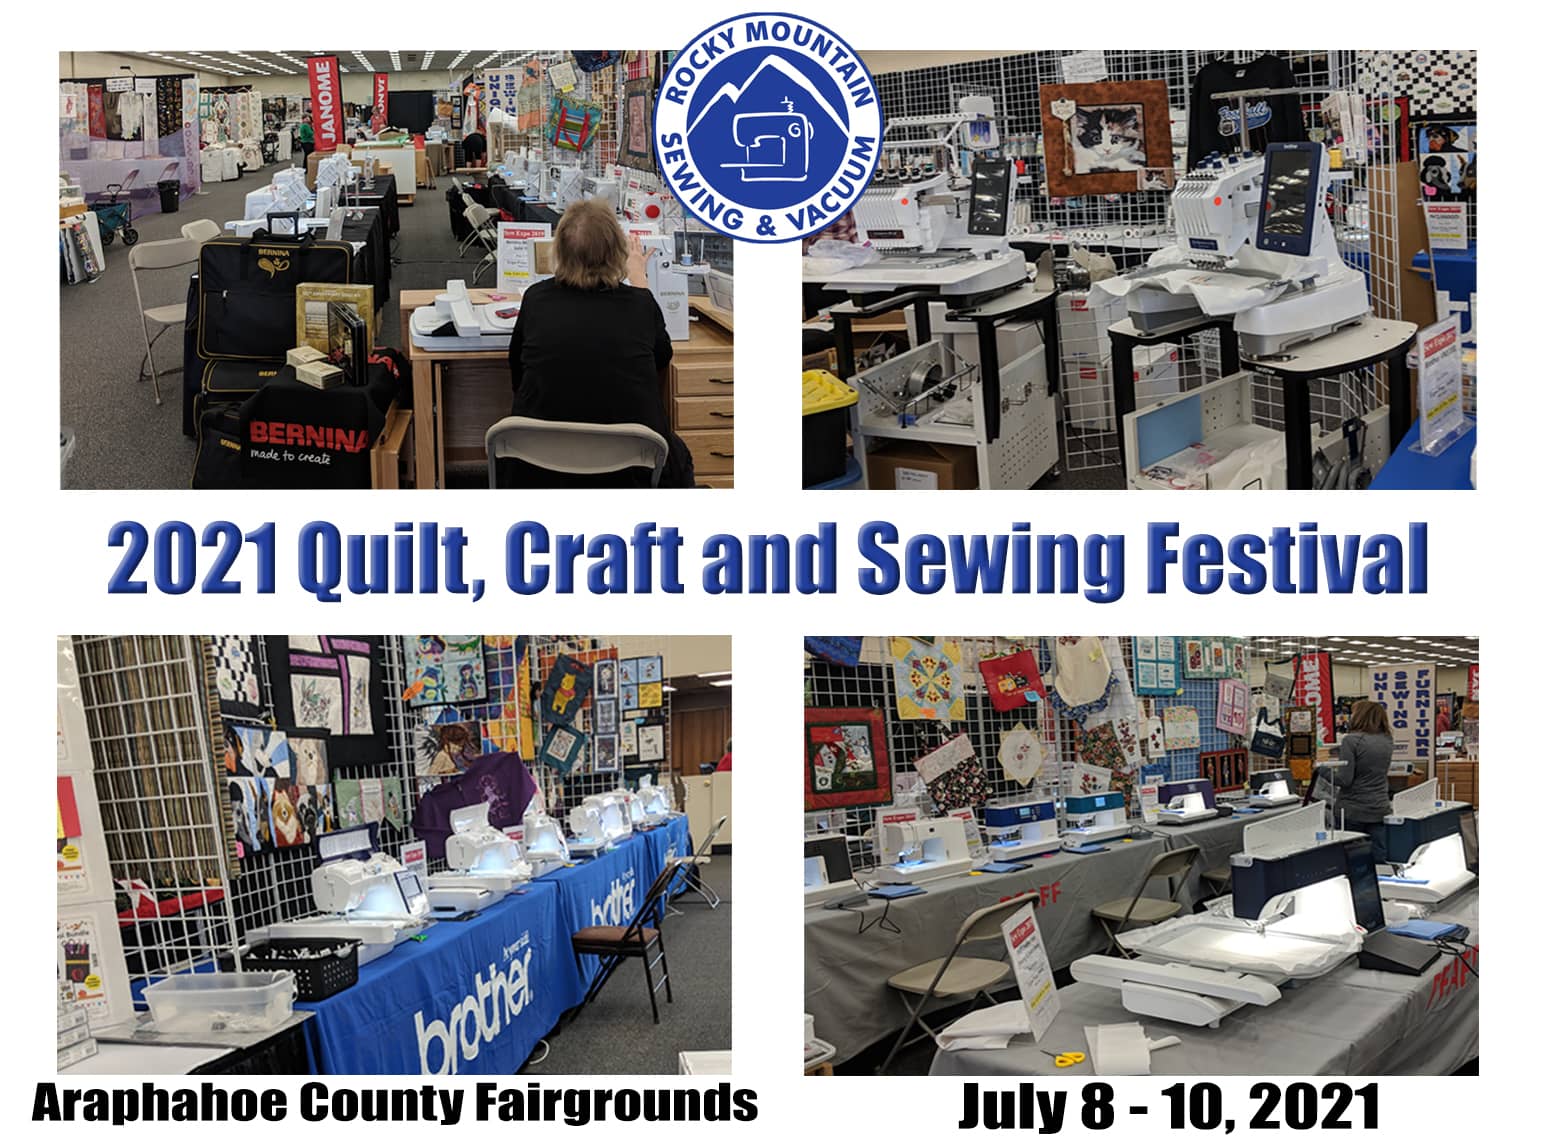 The Denver Quilt, Craft and Sewing Festival is Back!